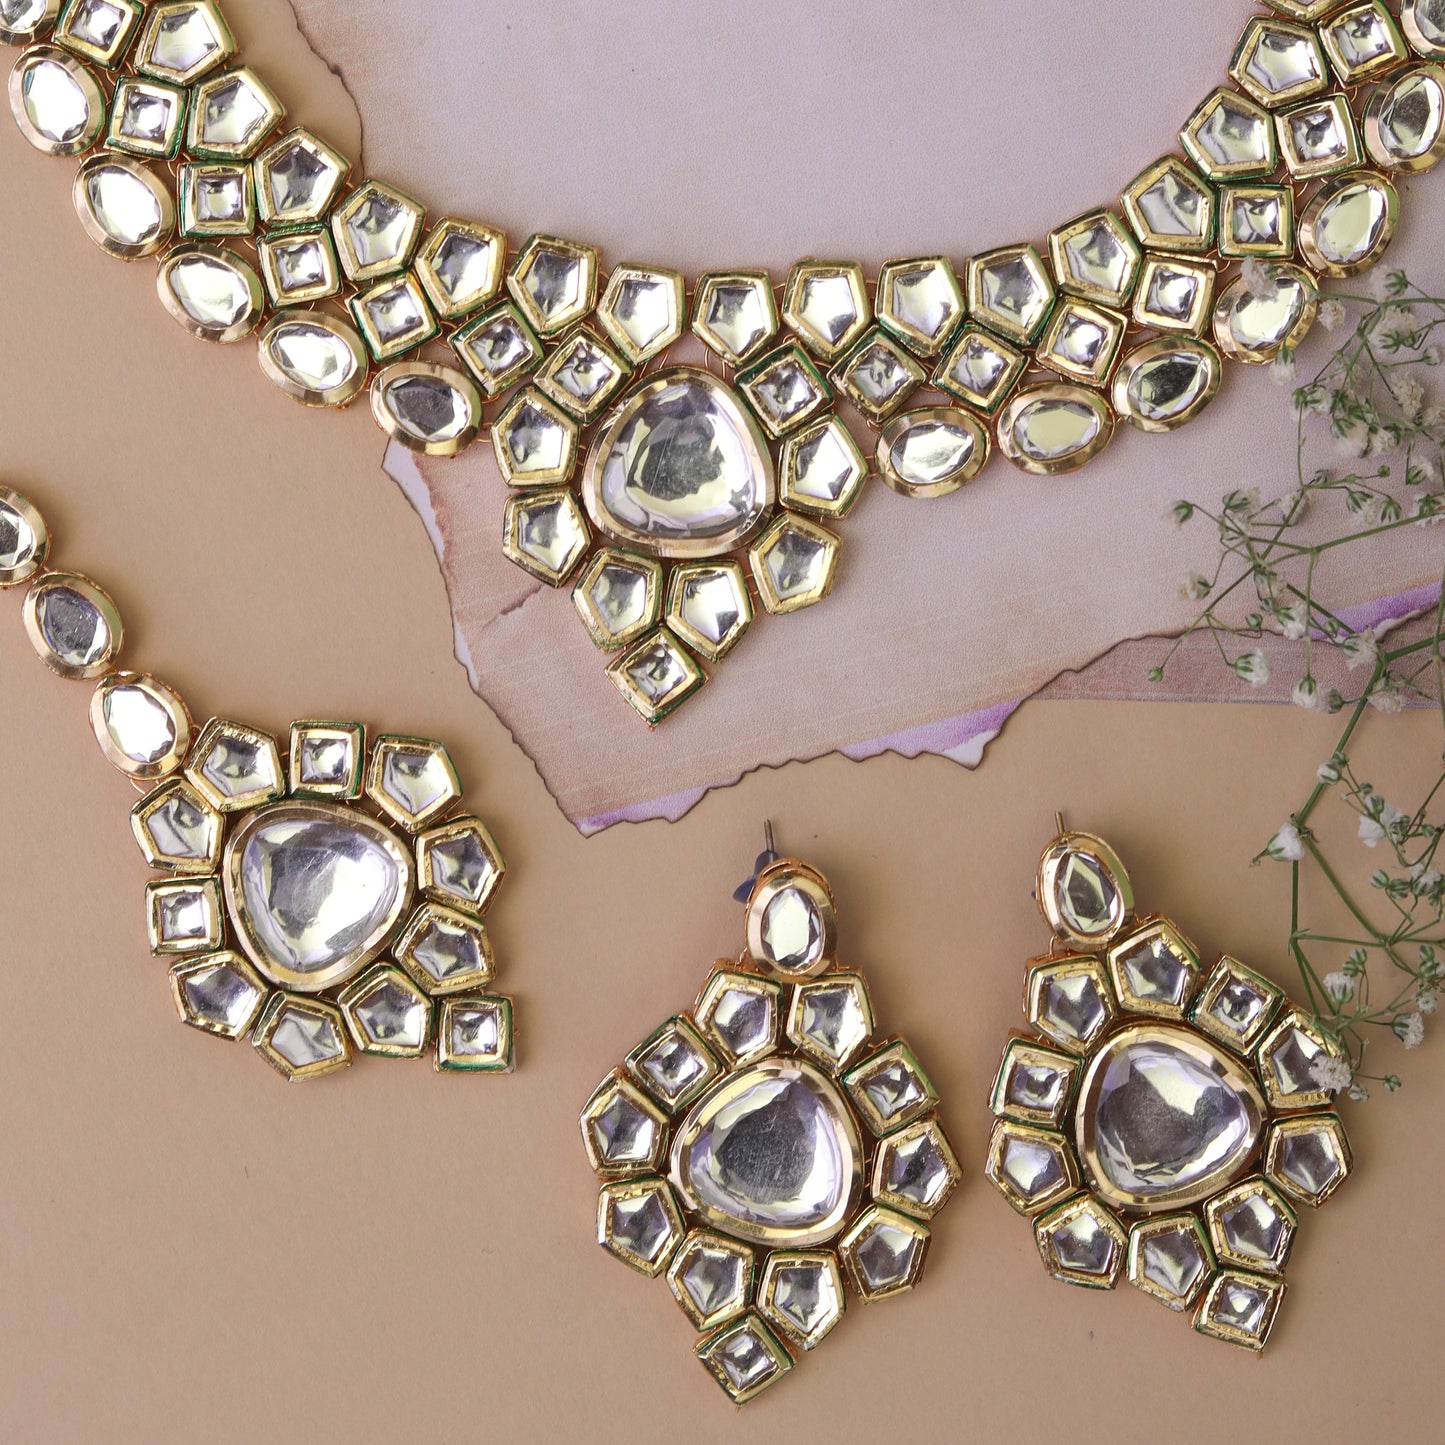 Amrapali Bridal Necklace set with Earrings in Off white